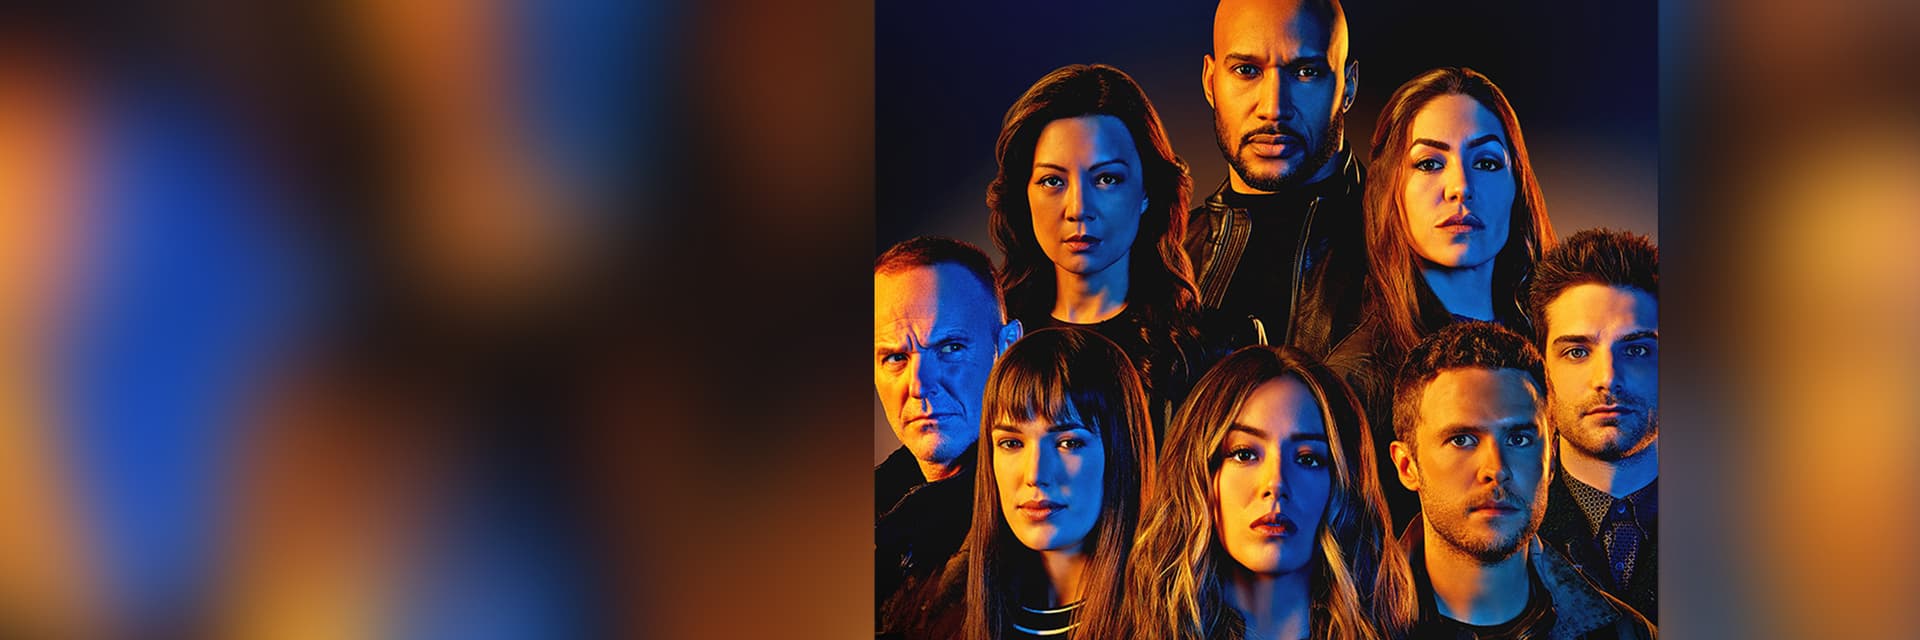 Marvel's Agents of SHIELD S.H.I.E.L.D. TV Show Season 6 Poster